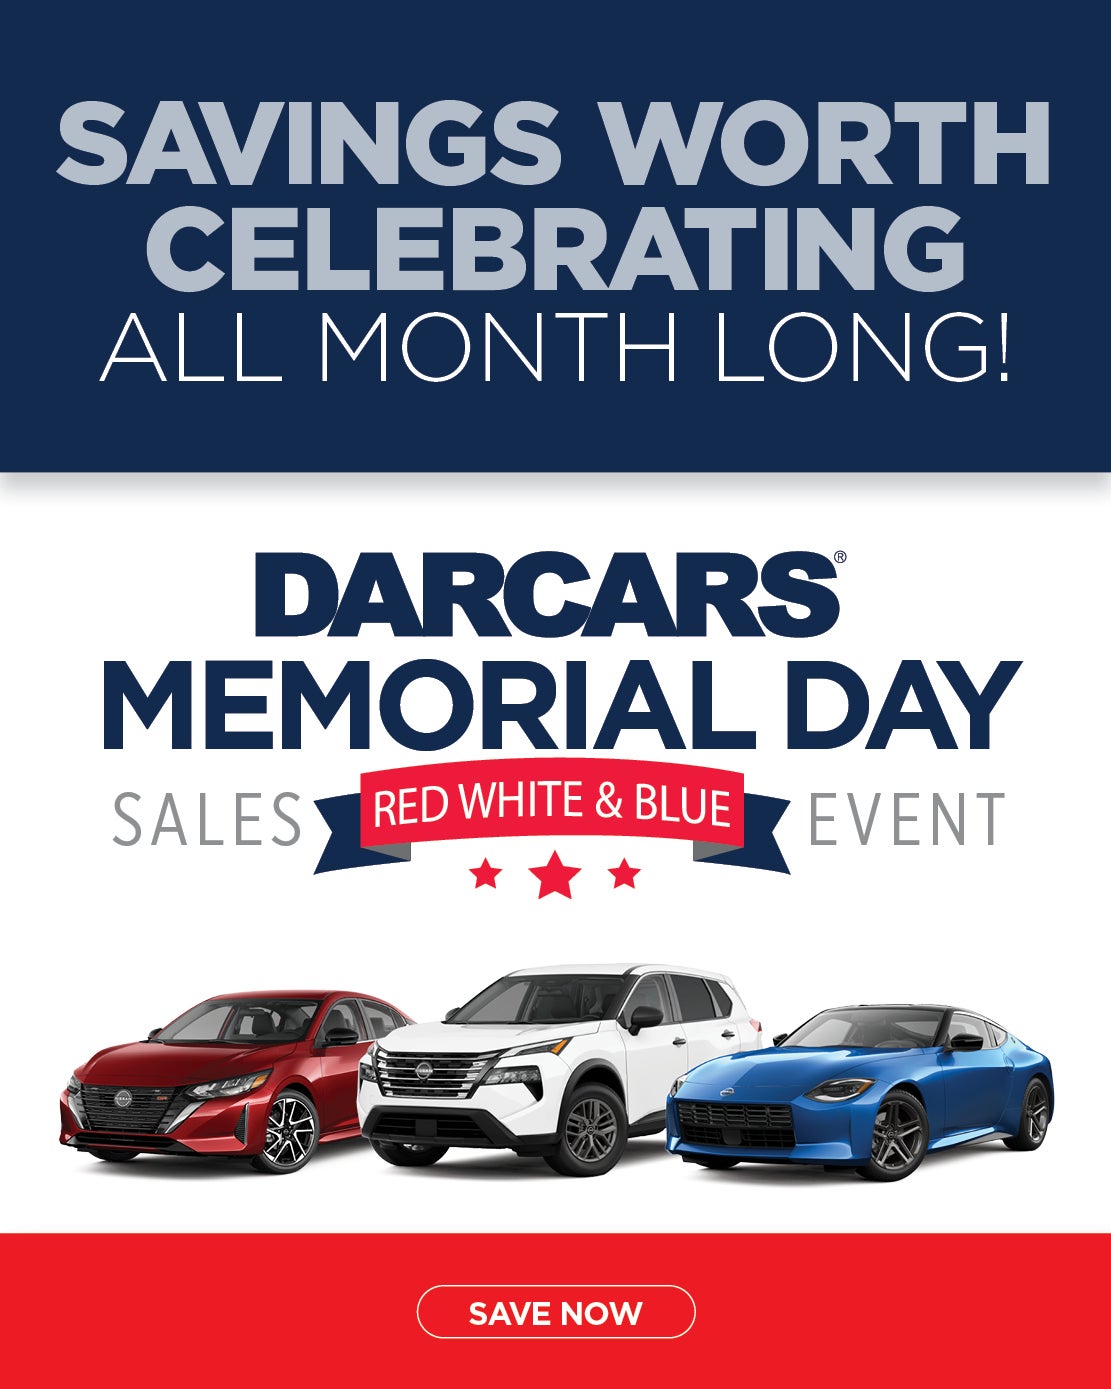 DARCARS Memorial Day Sales Event!